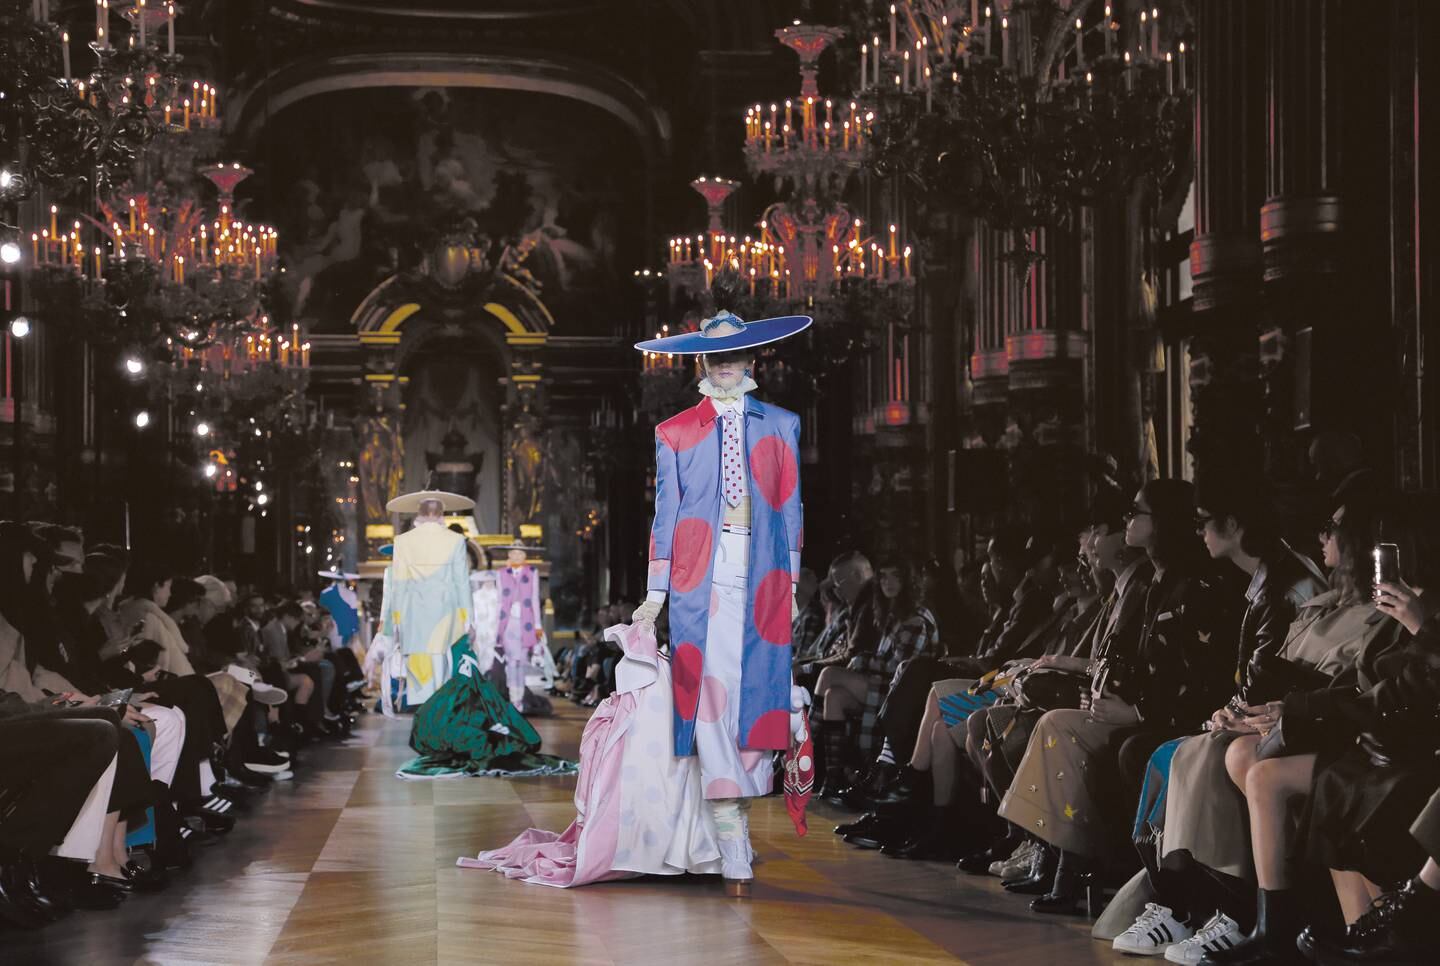 Thom Browne Spring 2023 Ready-to-Wear collection.